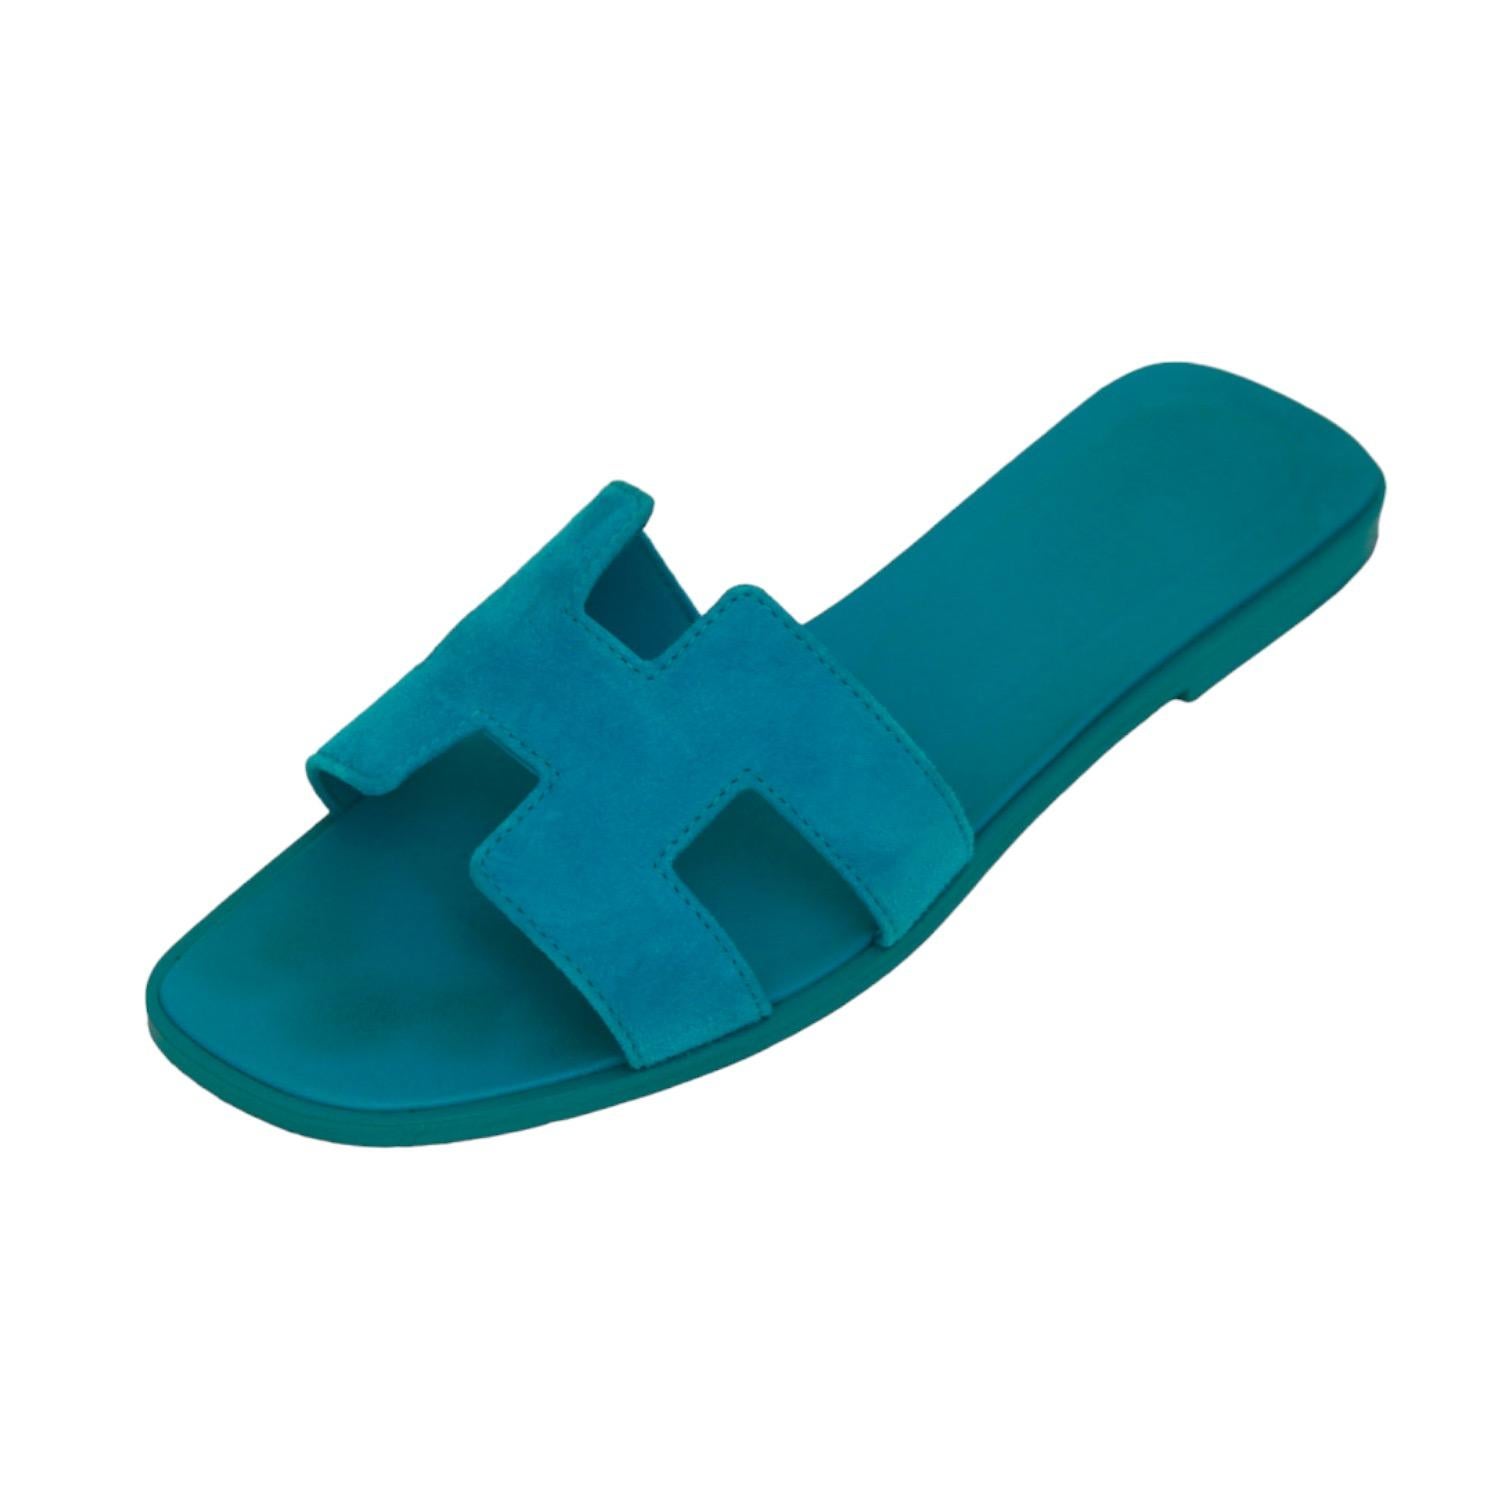 HERMES Oran Sandal Slide Mule Blue Suede Leather Flats H Strap Sz 38 In Excellent Condition For Sale In Hollywood, FL